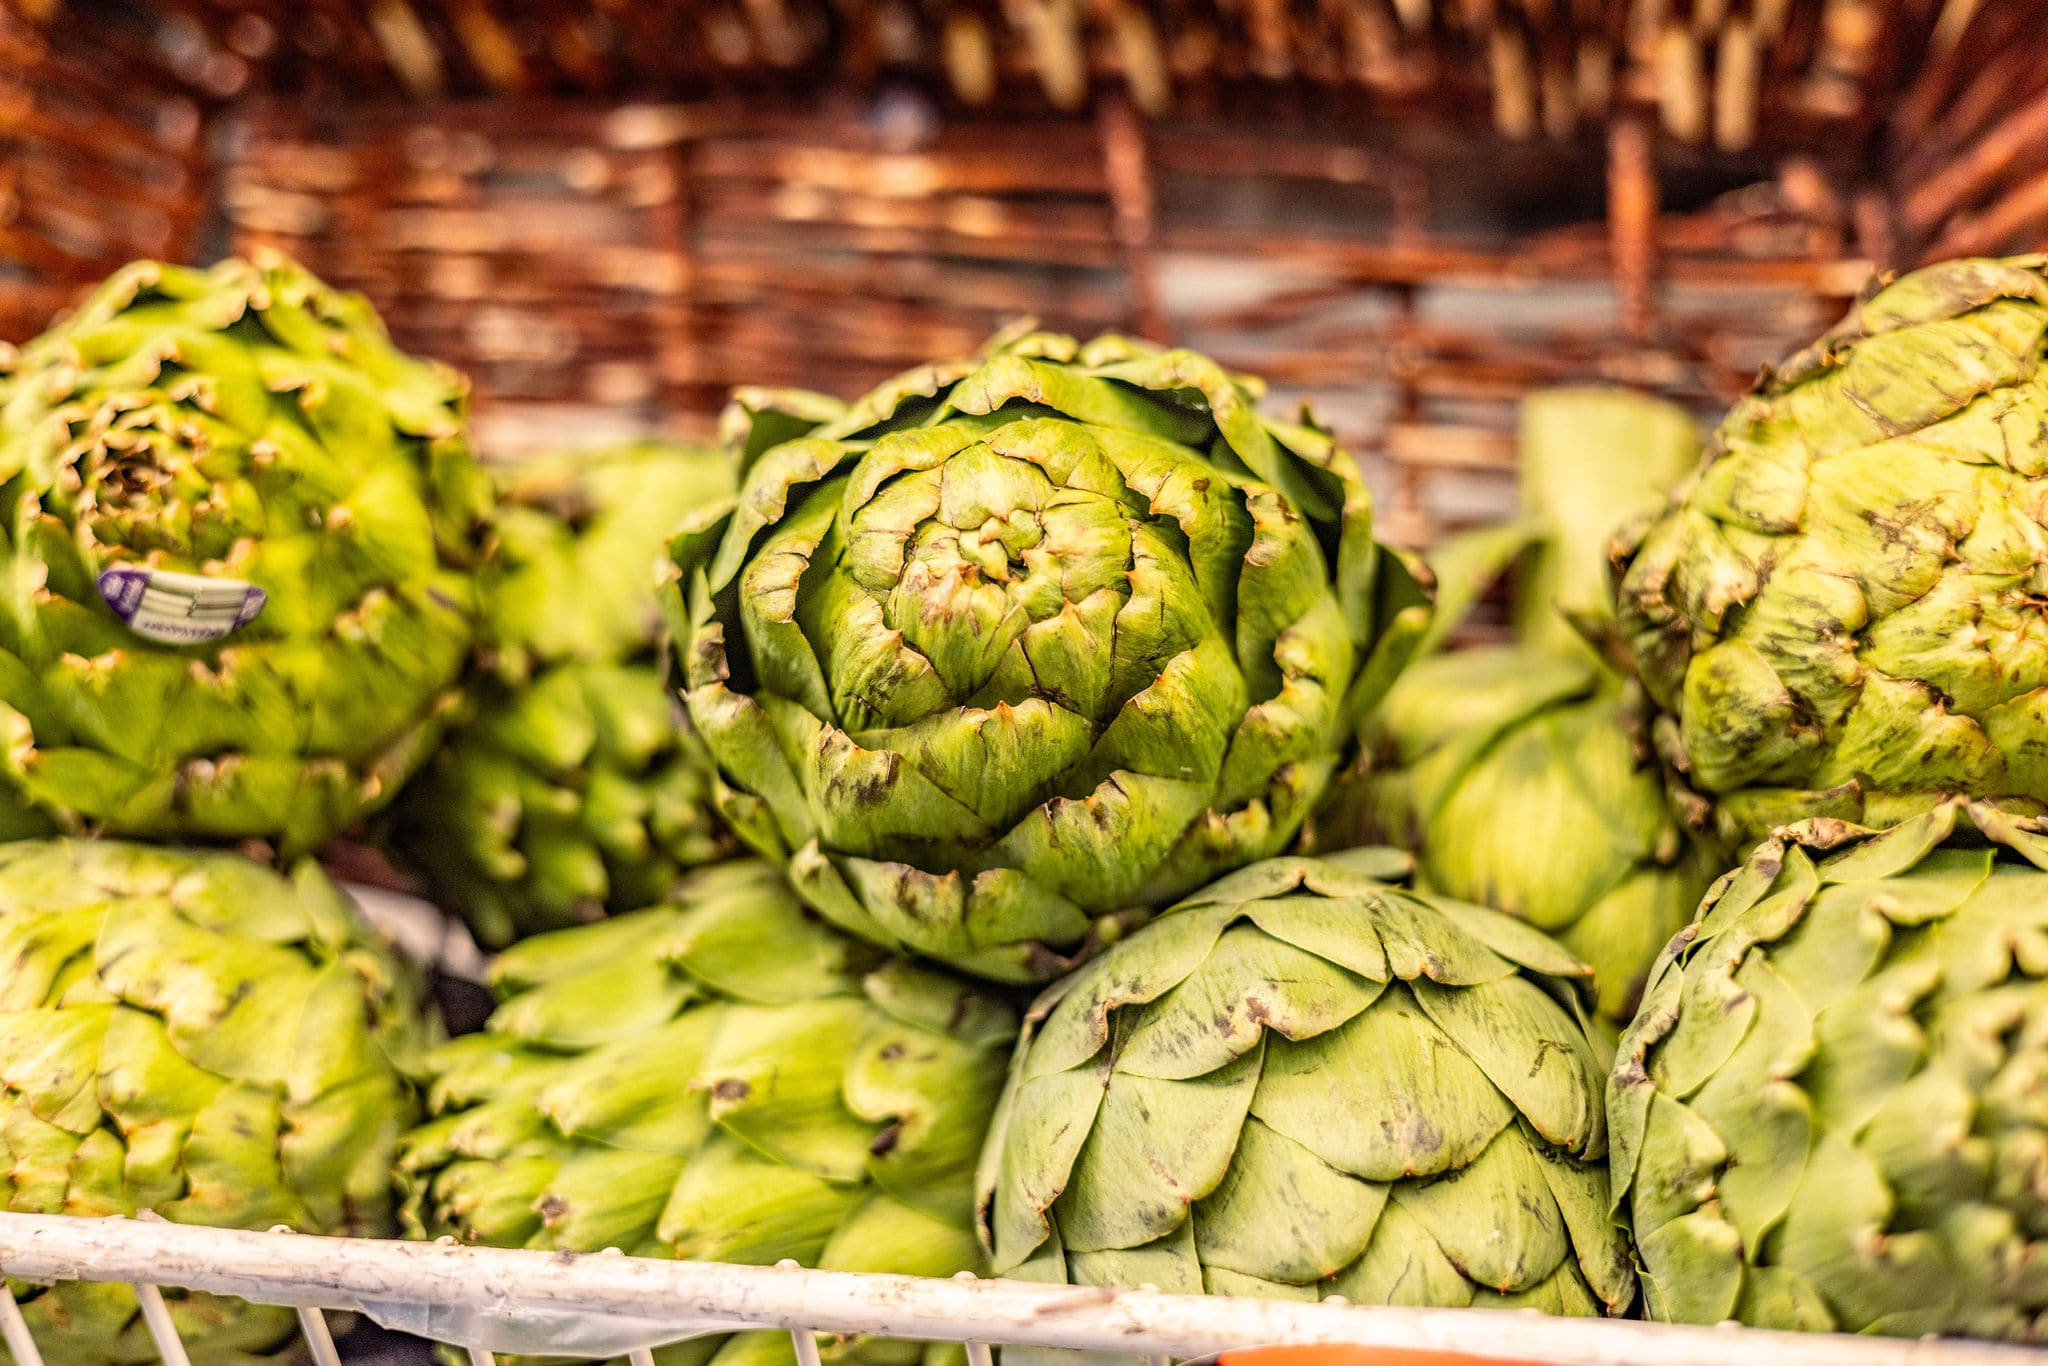 Eight artichokes are pictured, with the focus being on one artichoke in the center.